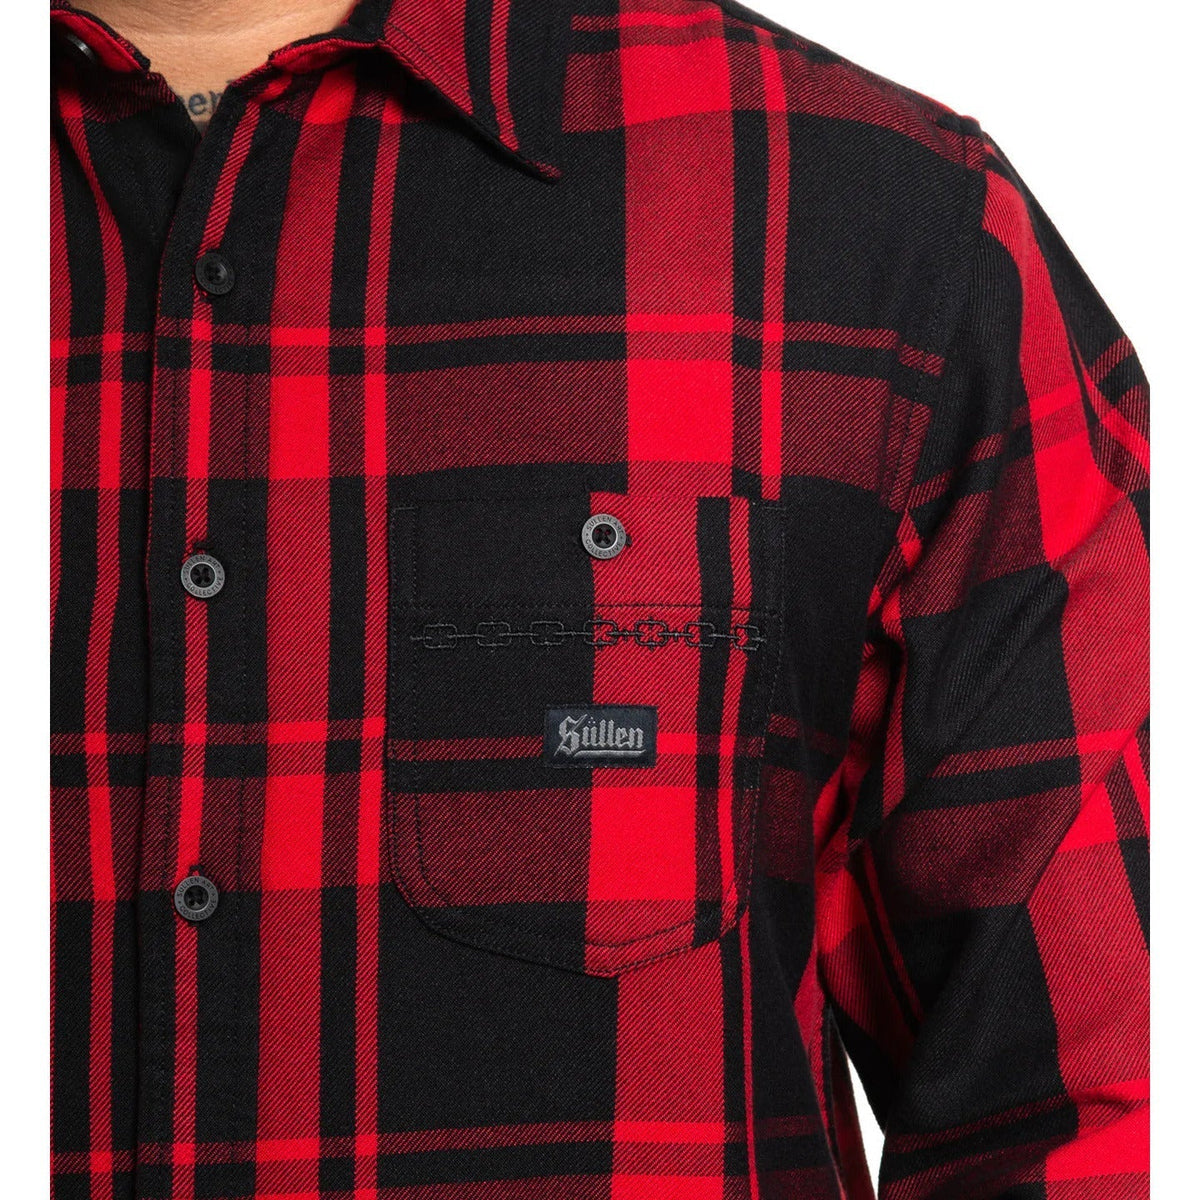 SULLEN-ART-COLLECTIVE-OVERCAST-FLANNEL - FLANNEL - Synik Clothing - synikclothing.com